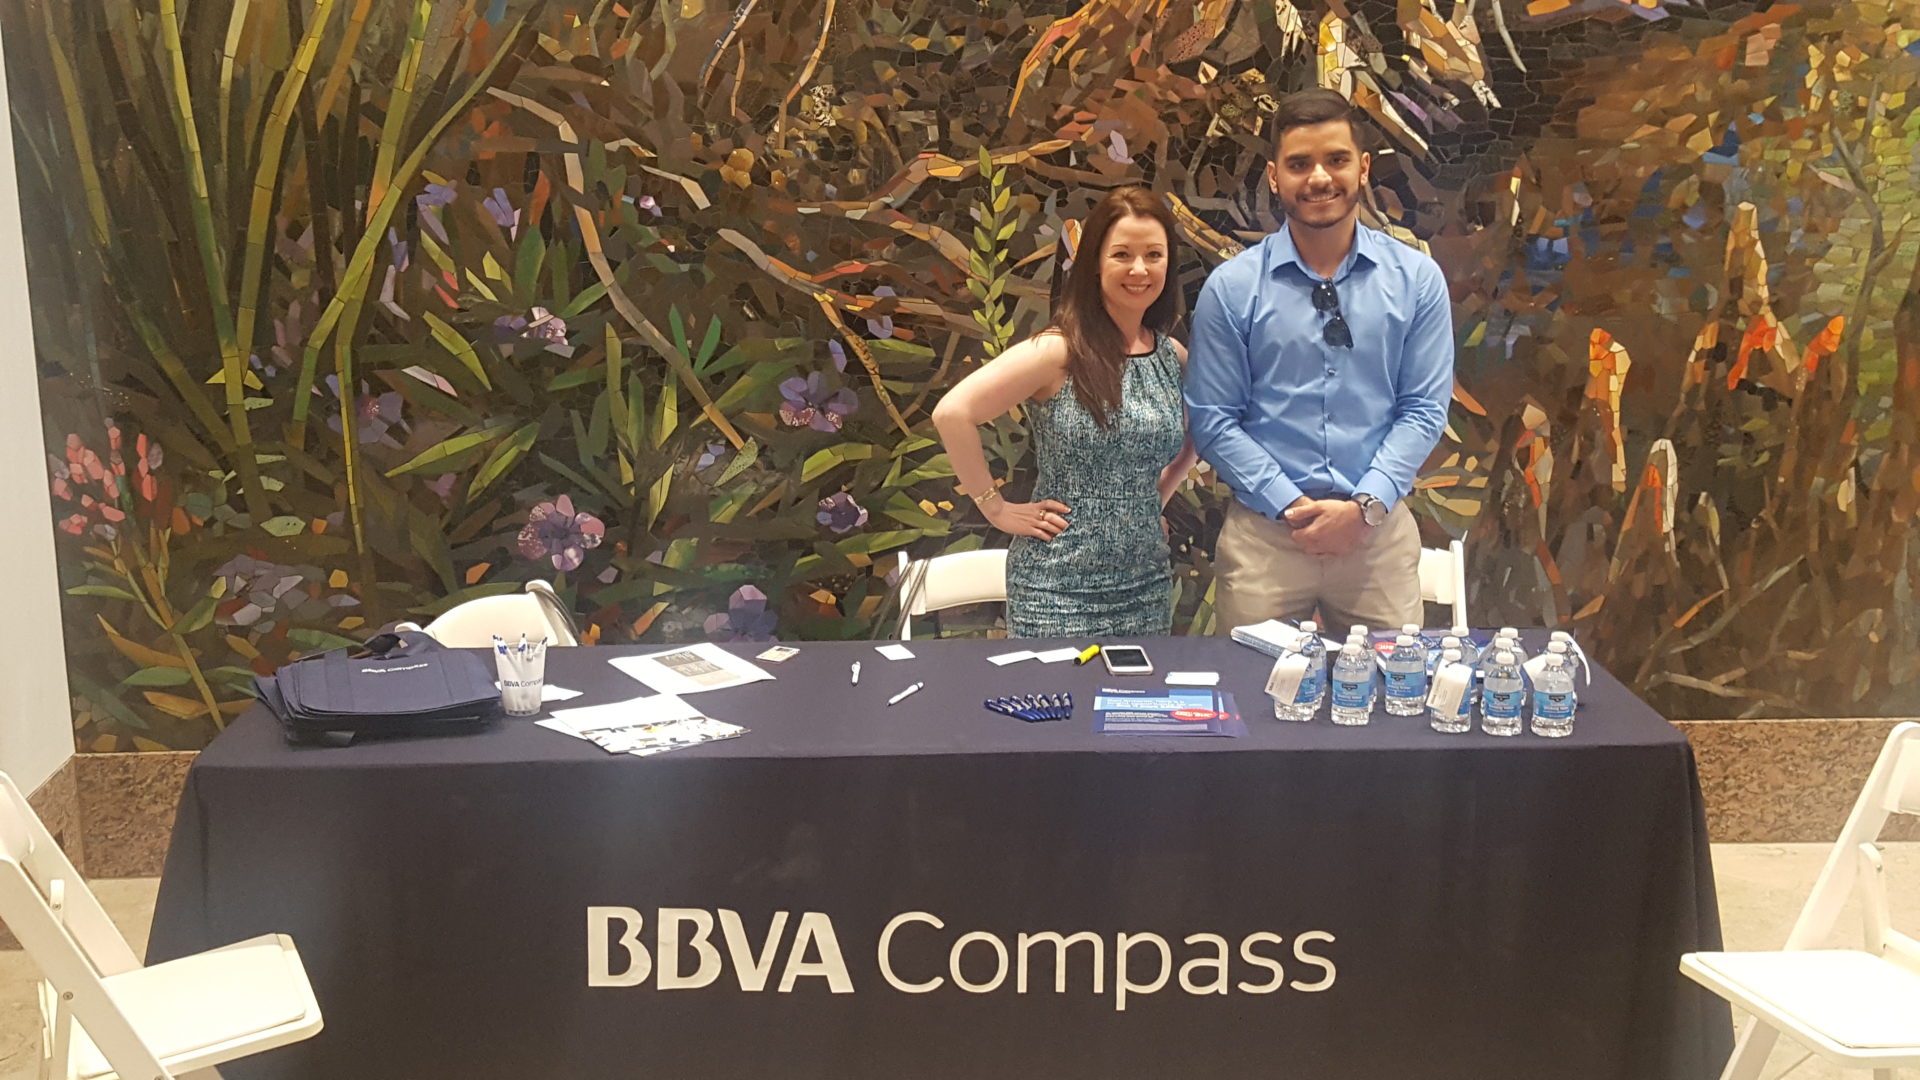 BBVA Compass conducts two week blitzes in markets across its footprint.